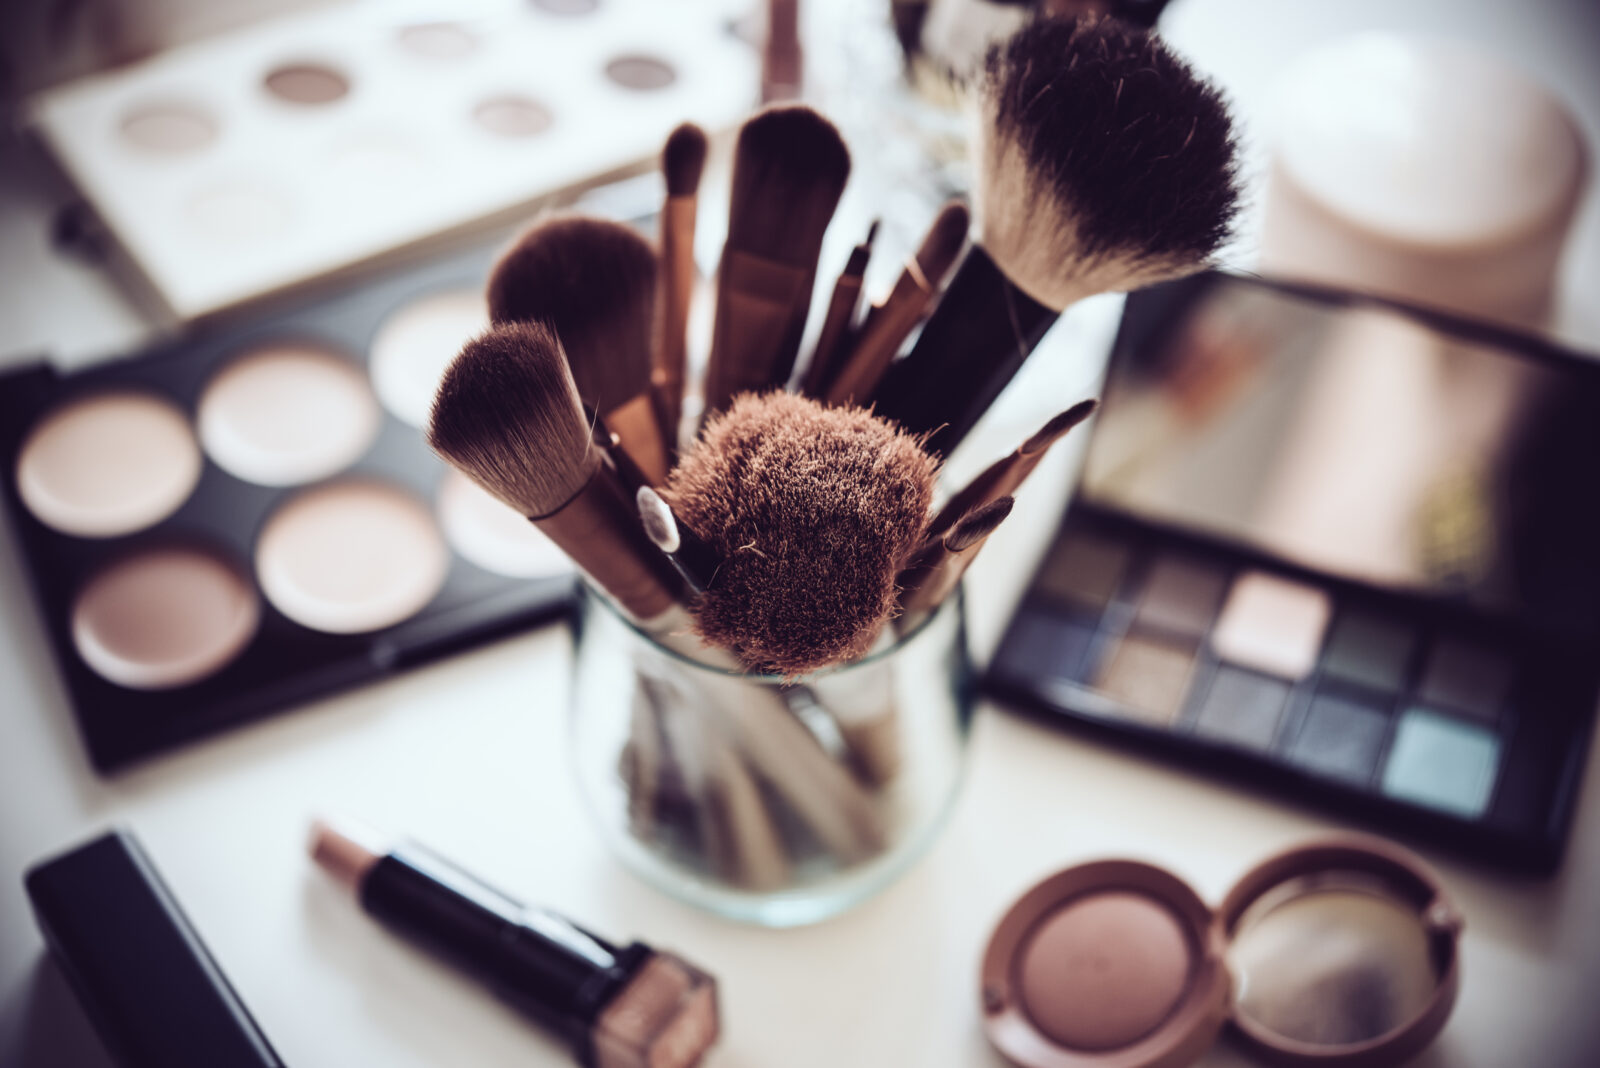 Professional makeup brushes and tools, natural make-up products set on white table. 2023/03/AdobeStock_114707577.jpeg 